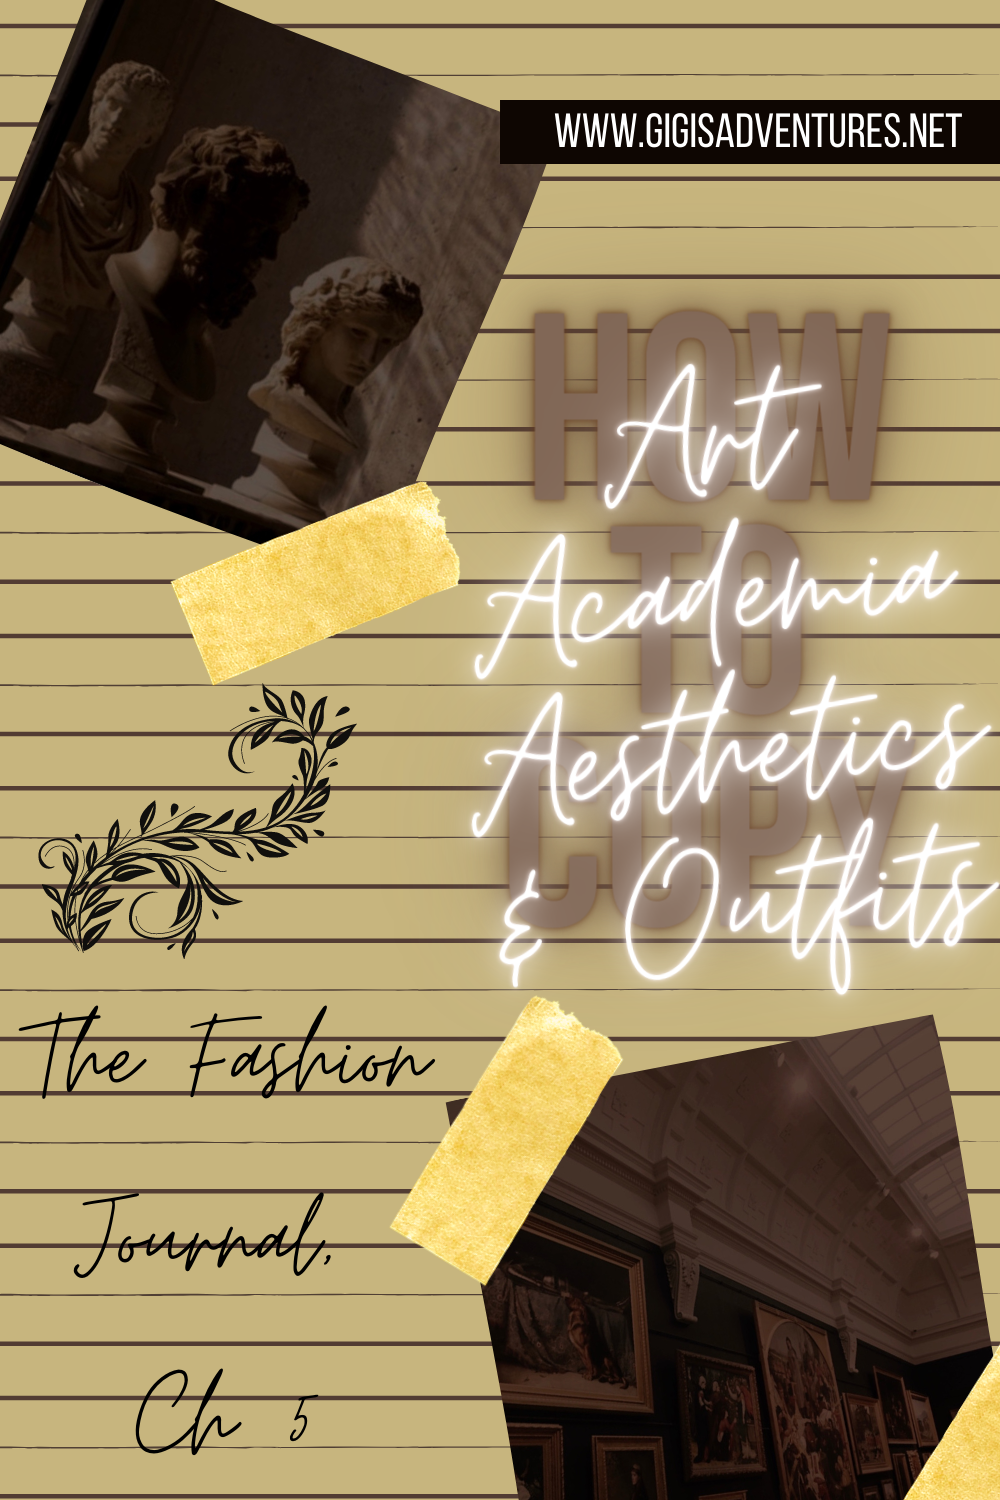 How To Copy Art Academia Aesthetics & Outfits | The Fashion Journal